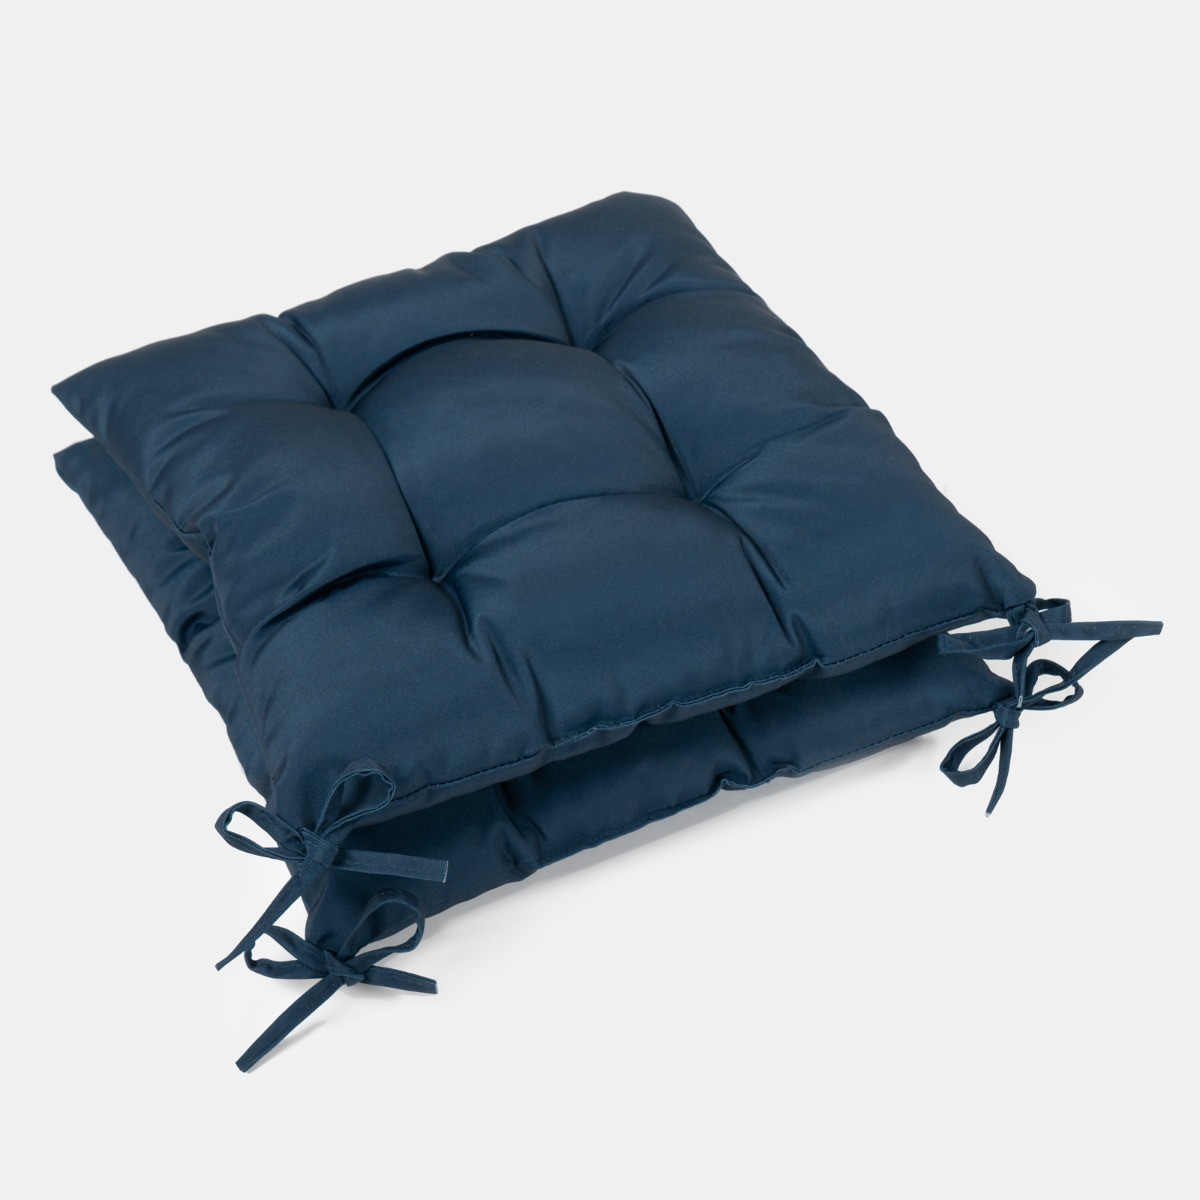 OHS Water Resistant Seat Pads - Navy Blue>